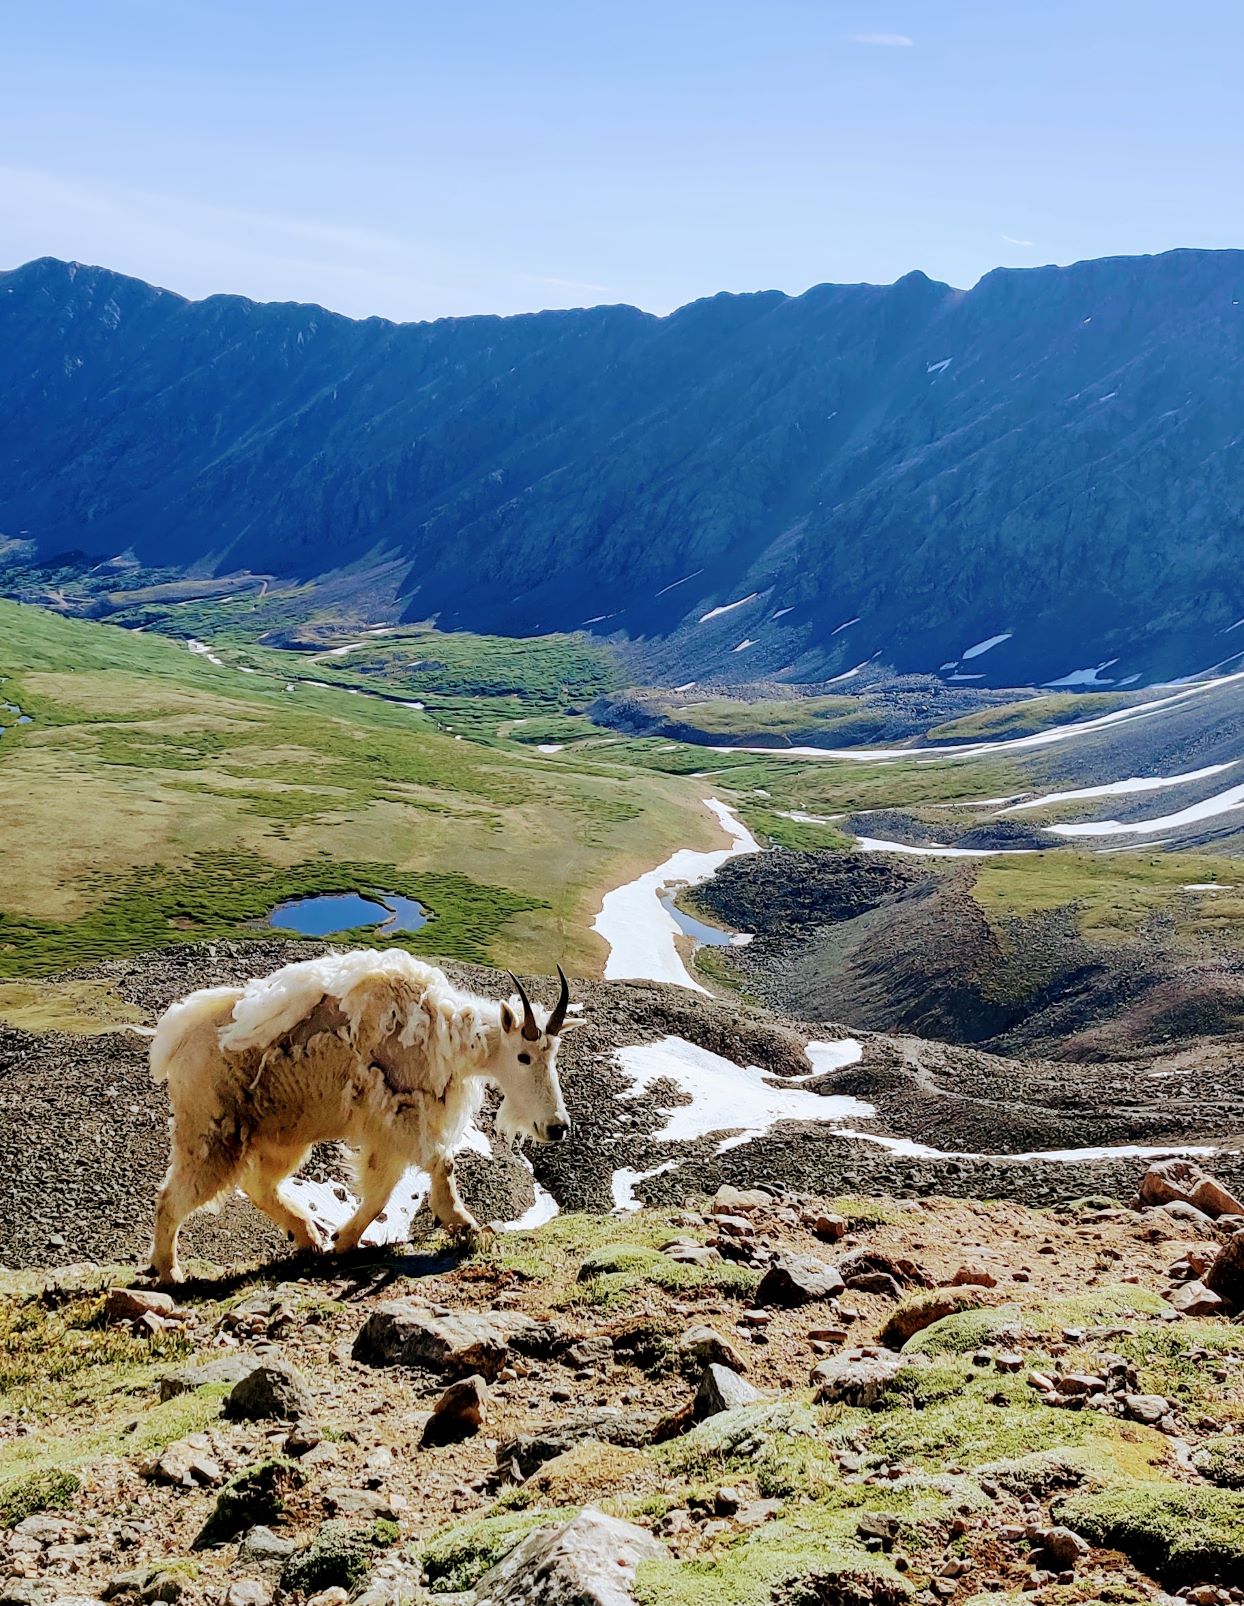 A mountain goat stands on a trail in Colorado with a mountain valley behind him